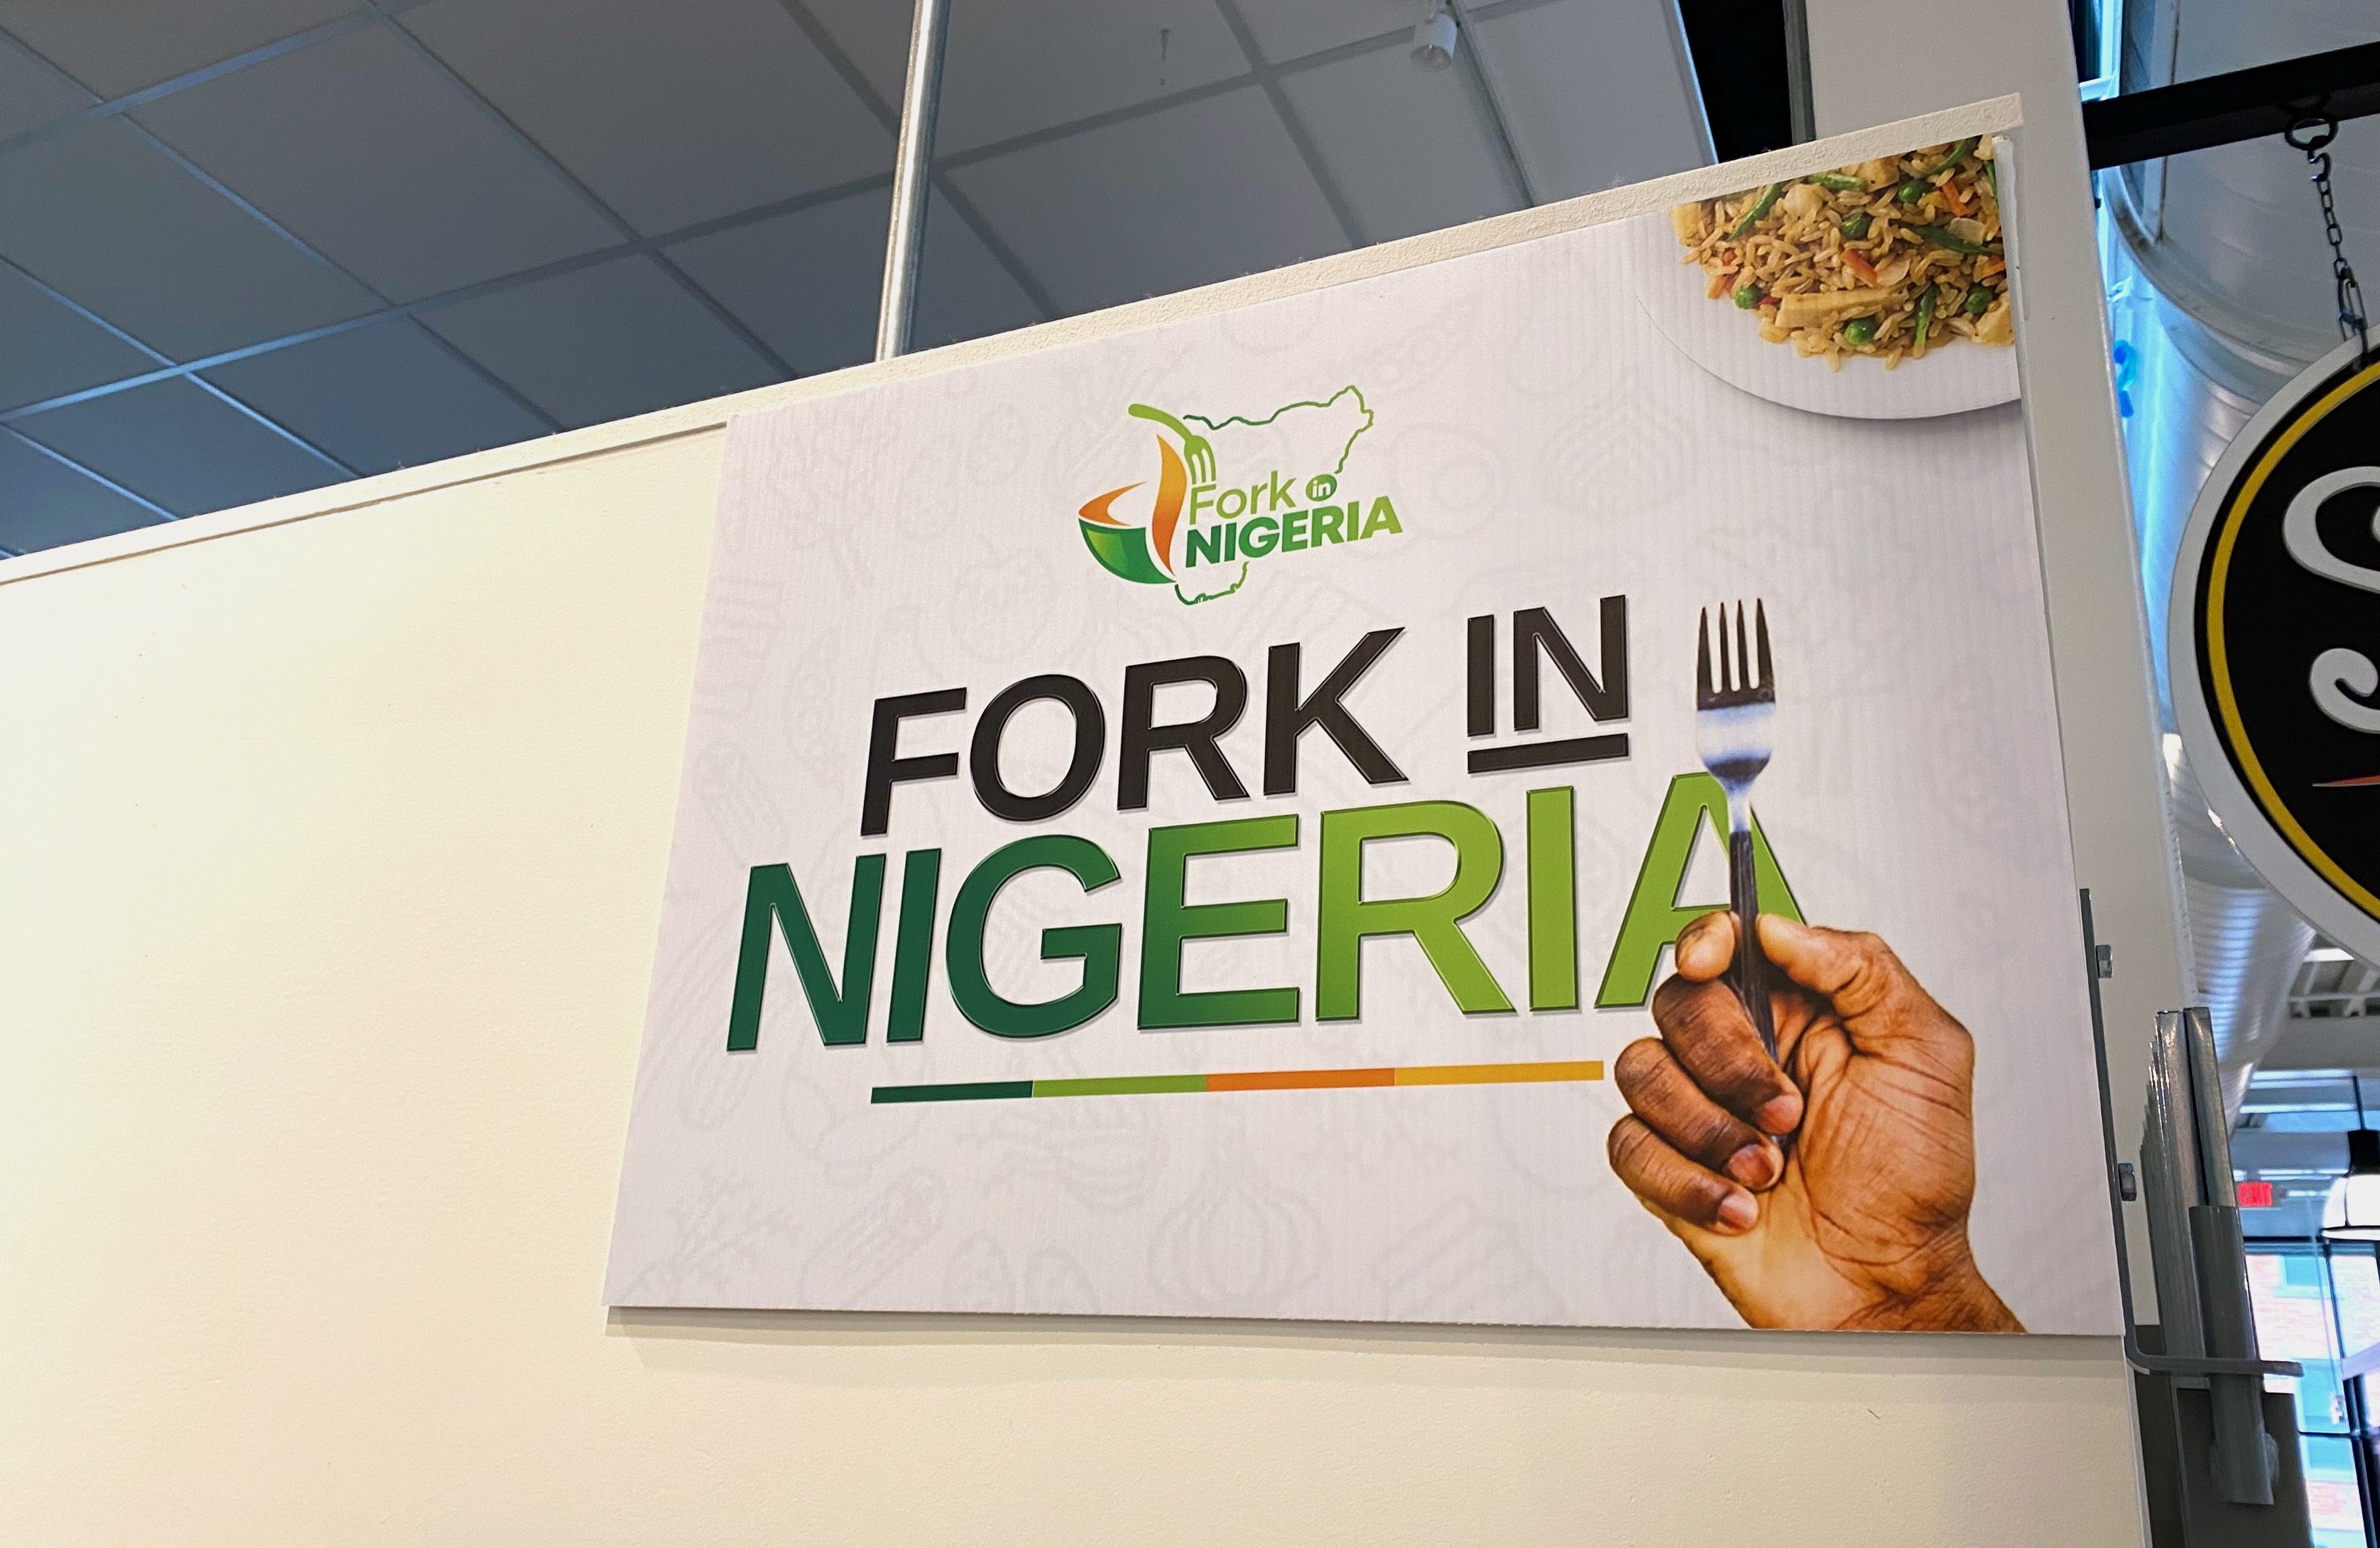 A sign reading "Fork in Nigeria" with a hand holding a fork